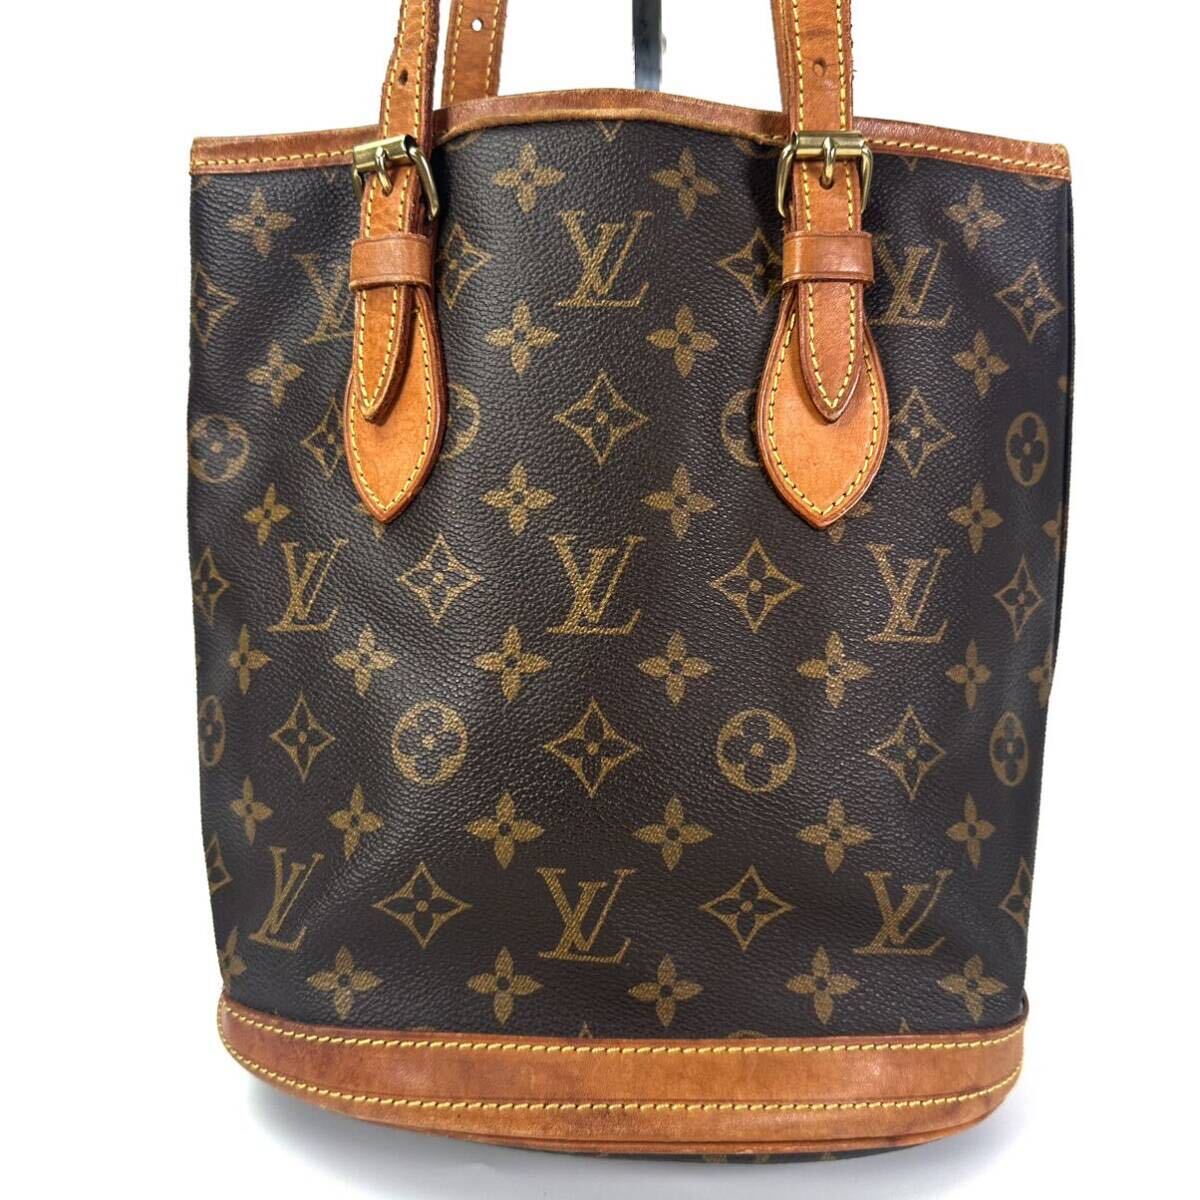 Louis Vuitton ルイヴィトン　バケットPM ショルダーバッグ　トートバッグ　プチバケット